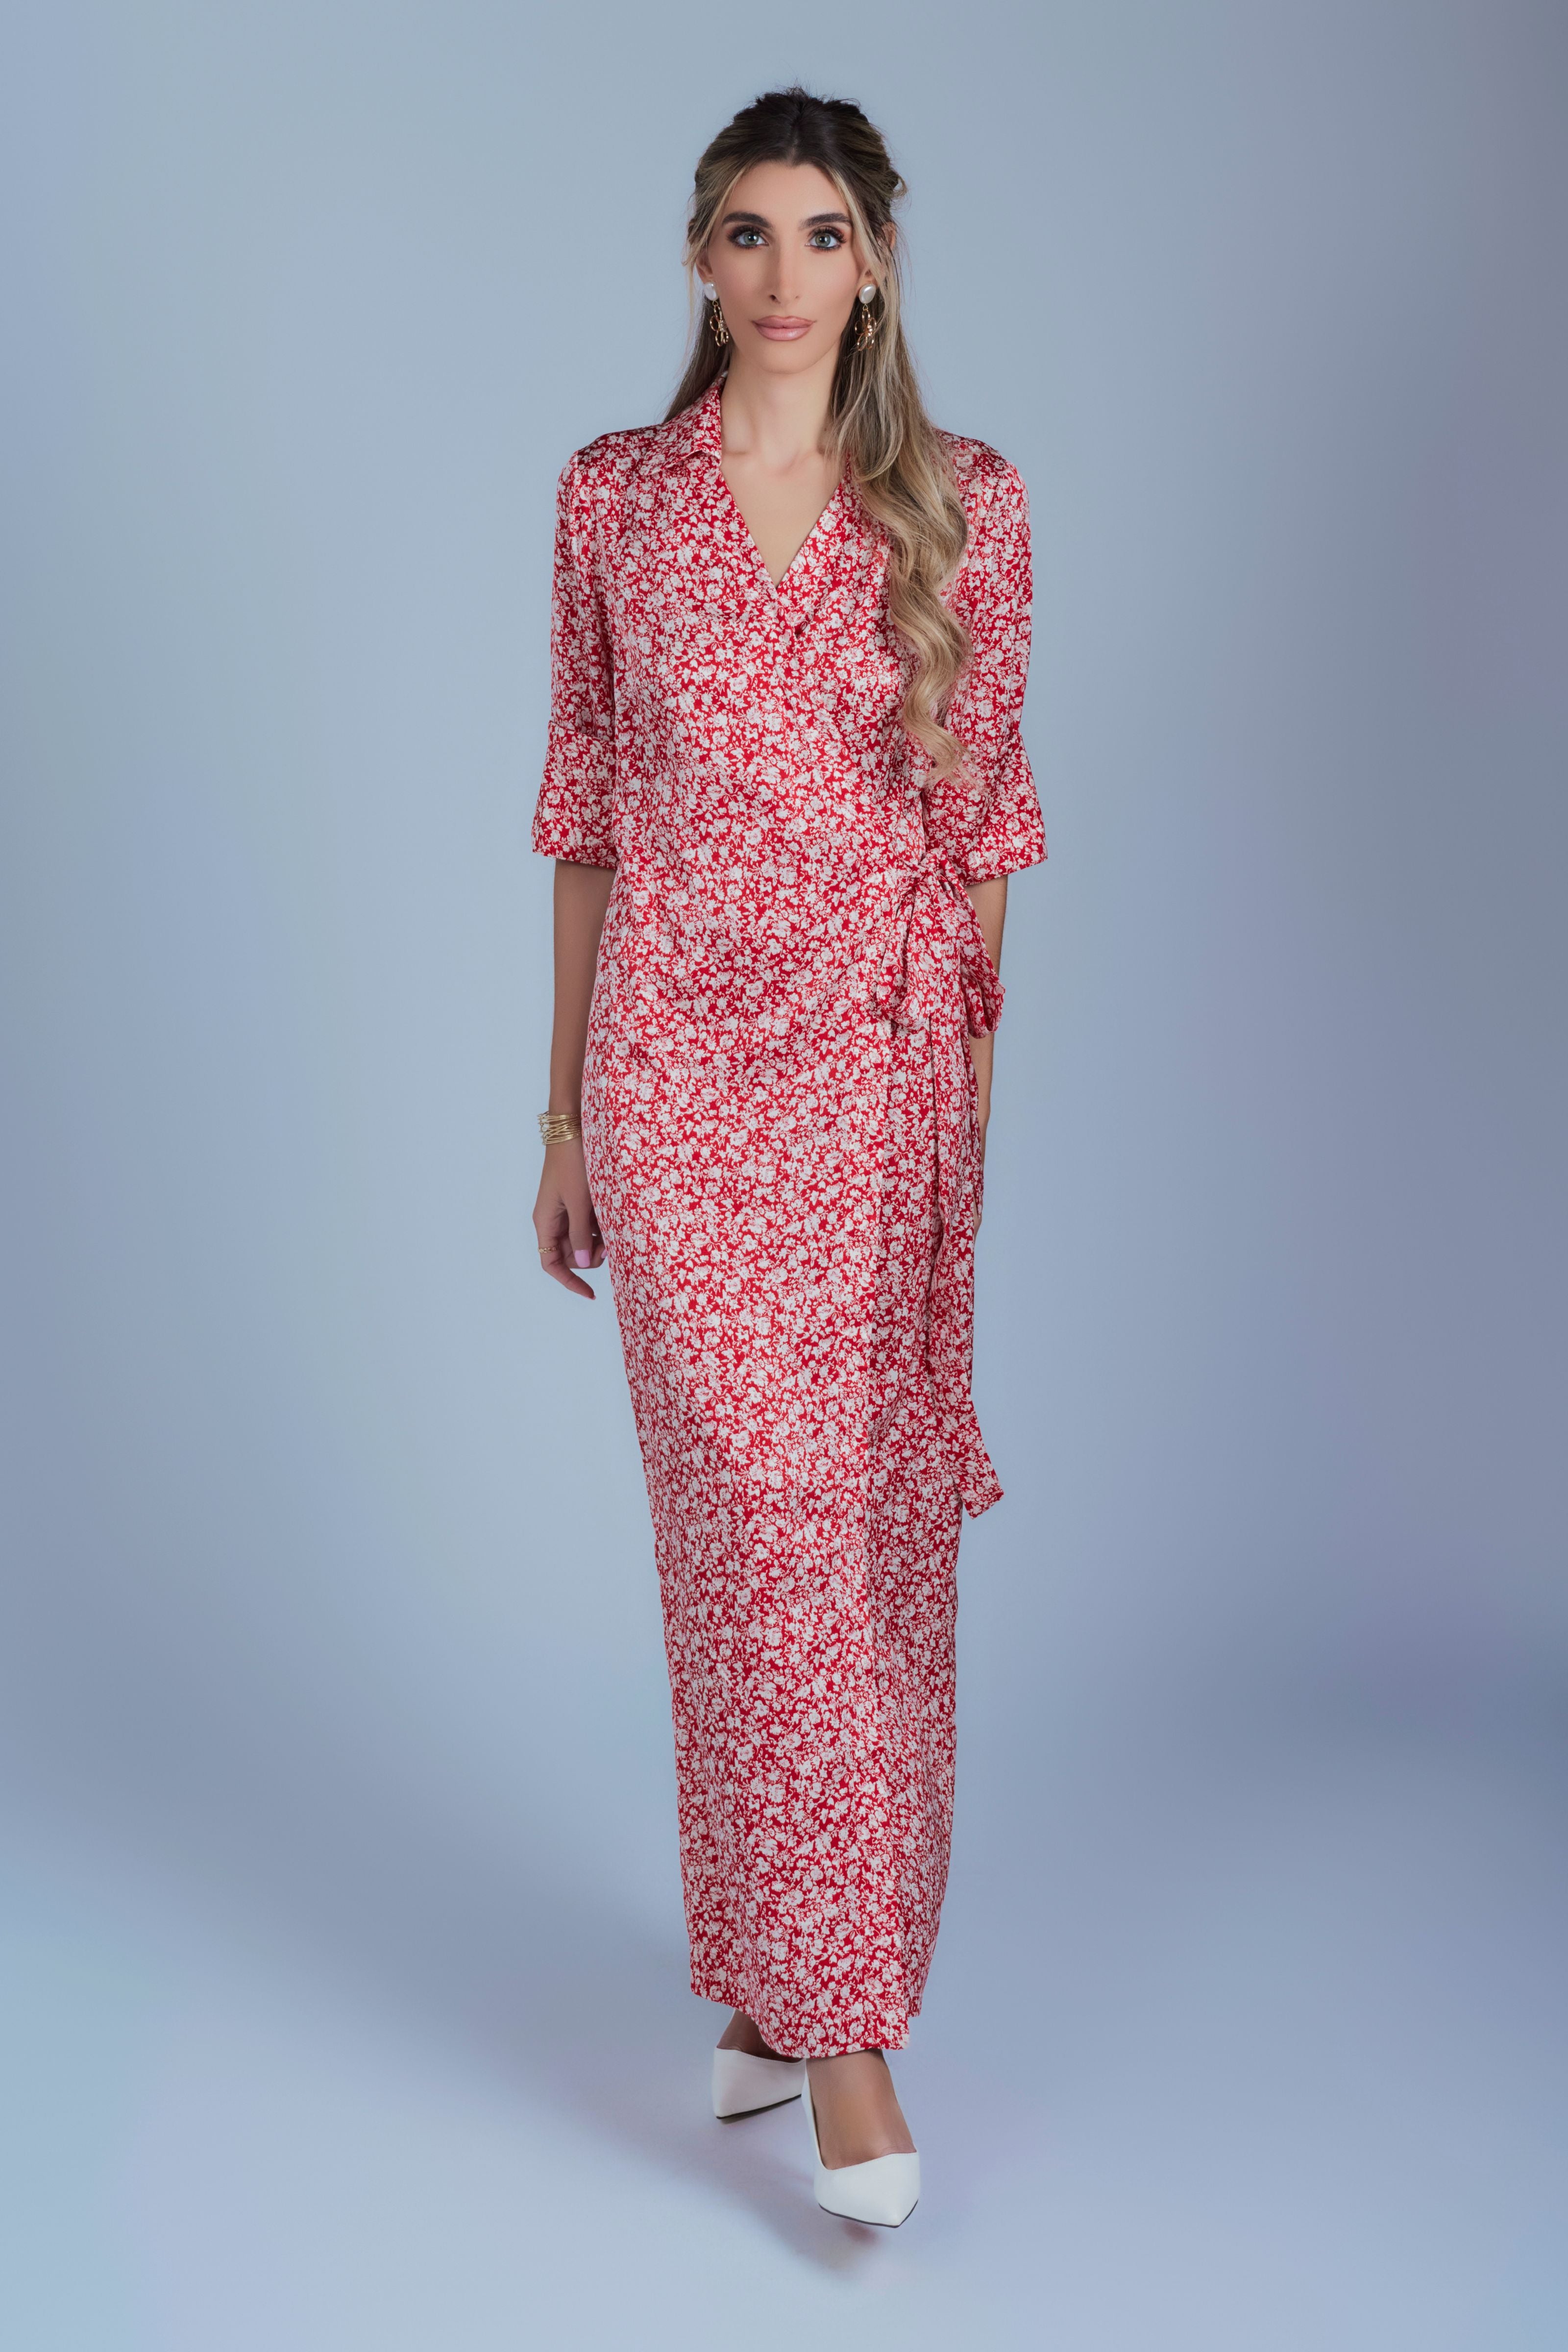 Floral Maxi Wrap Dress - Red and Cream - Olivvi World